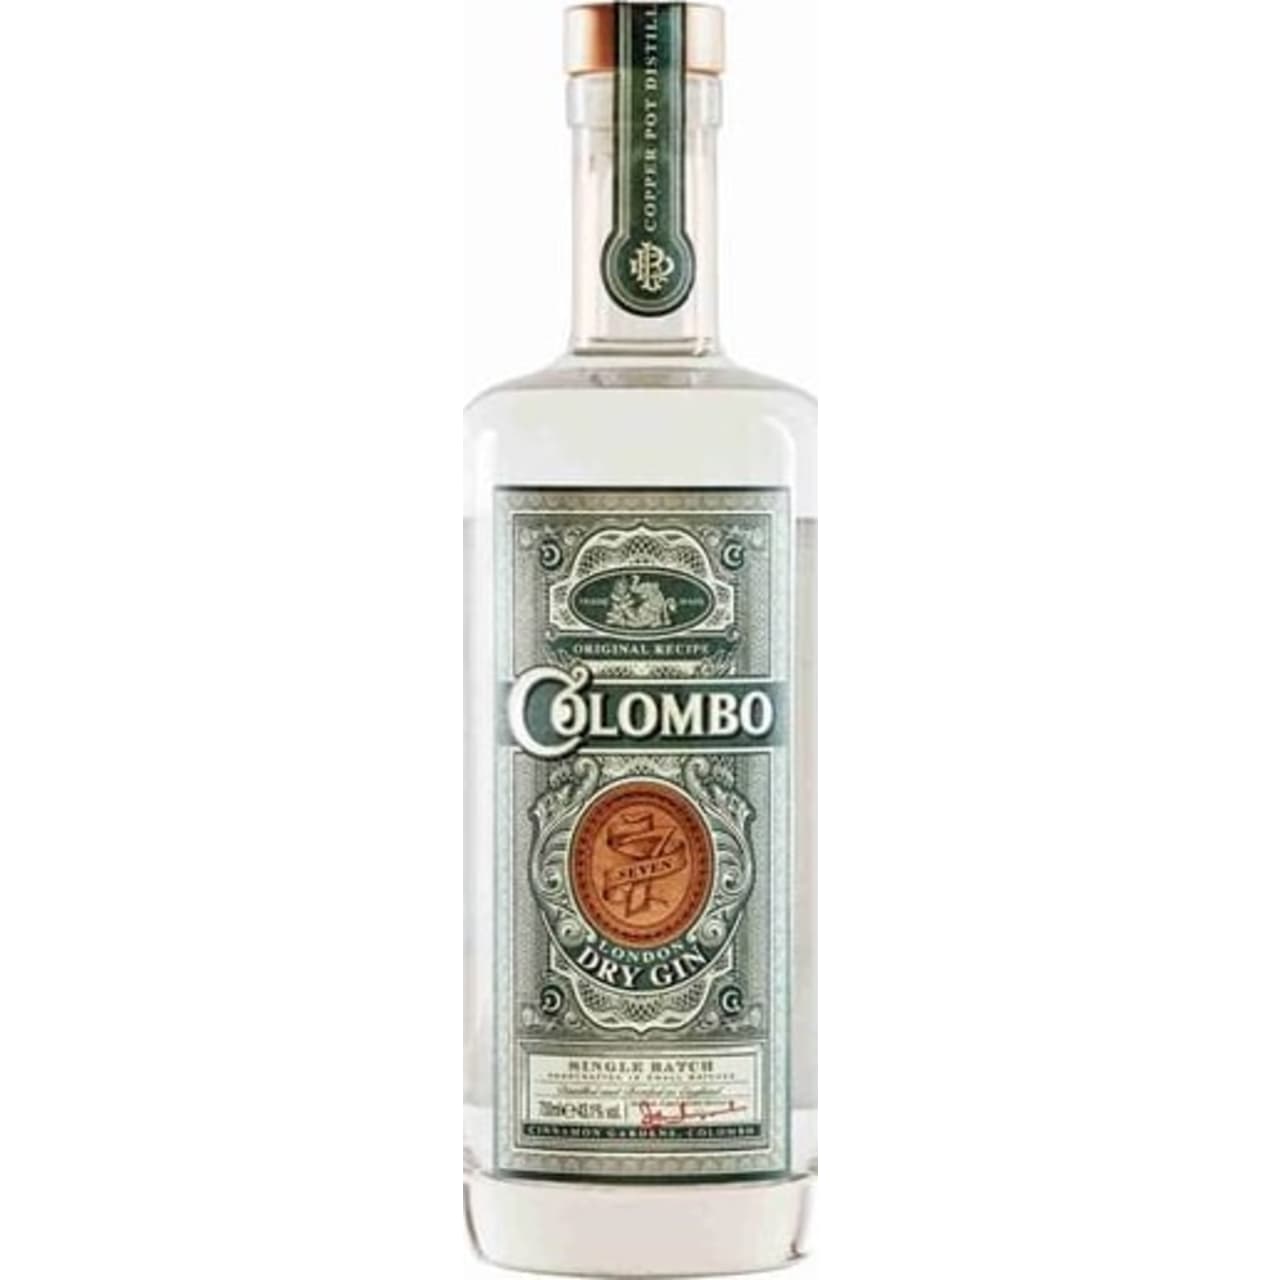 Colombo Gin is a London Dry Gin with a history and an unusual list of ingredients.